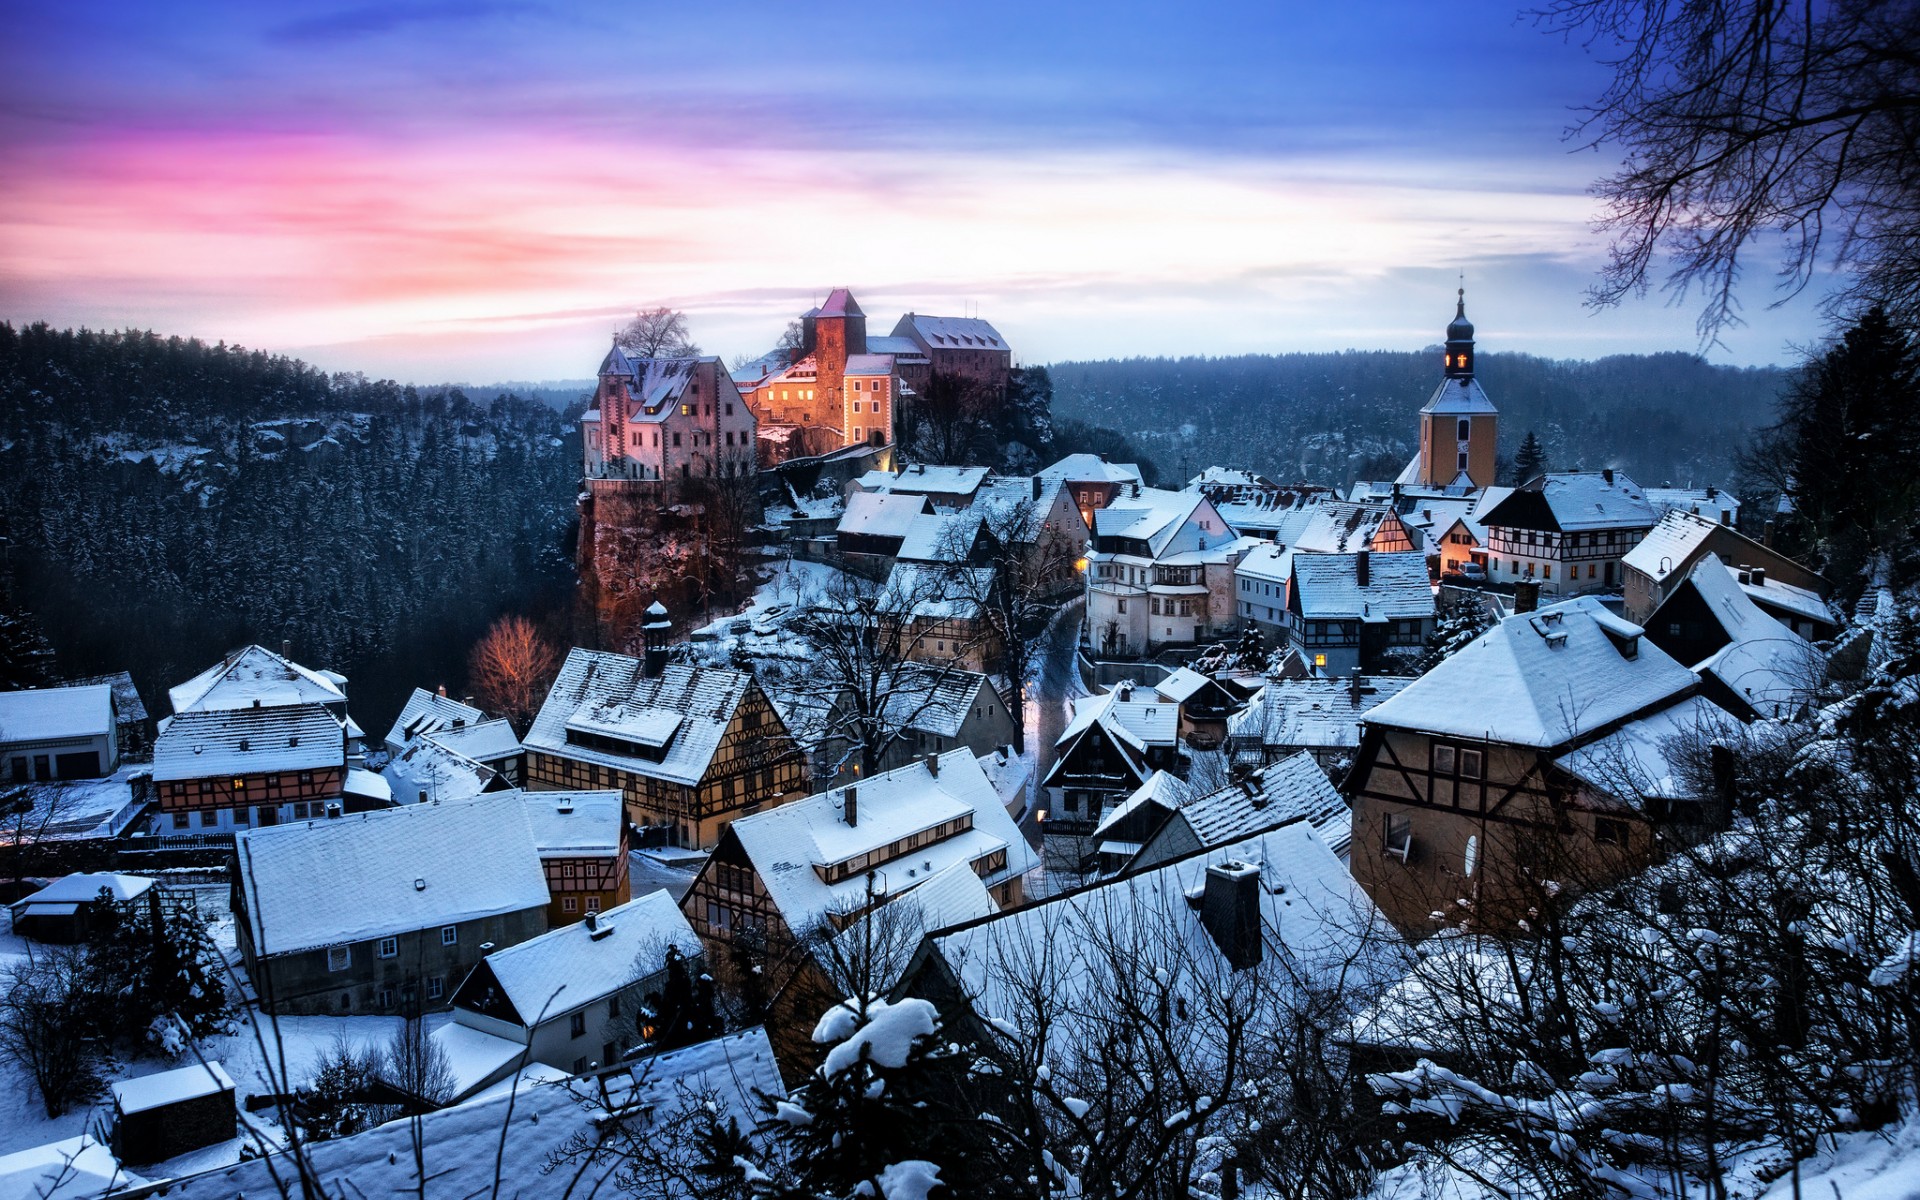 germany, Saxony, Honshtayn, Castle, Fort, Architecture, Cities, Sky, Sunset, Sunrise, Winter, Snow, Buildings, Mountains Wallpaper